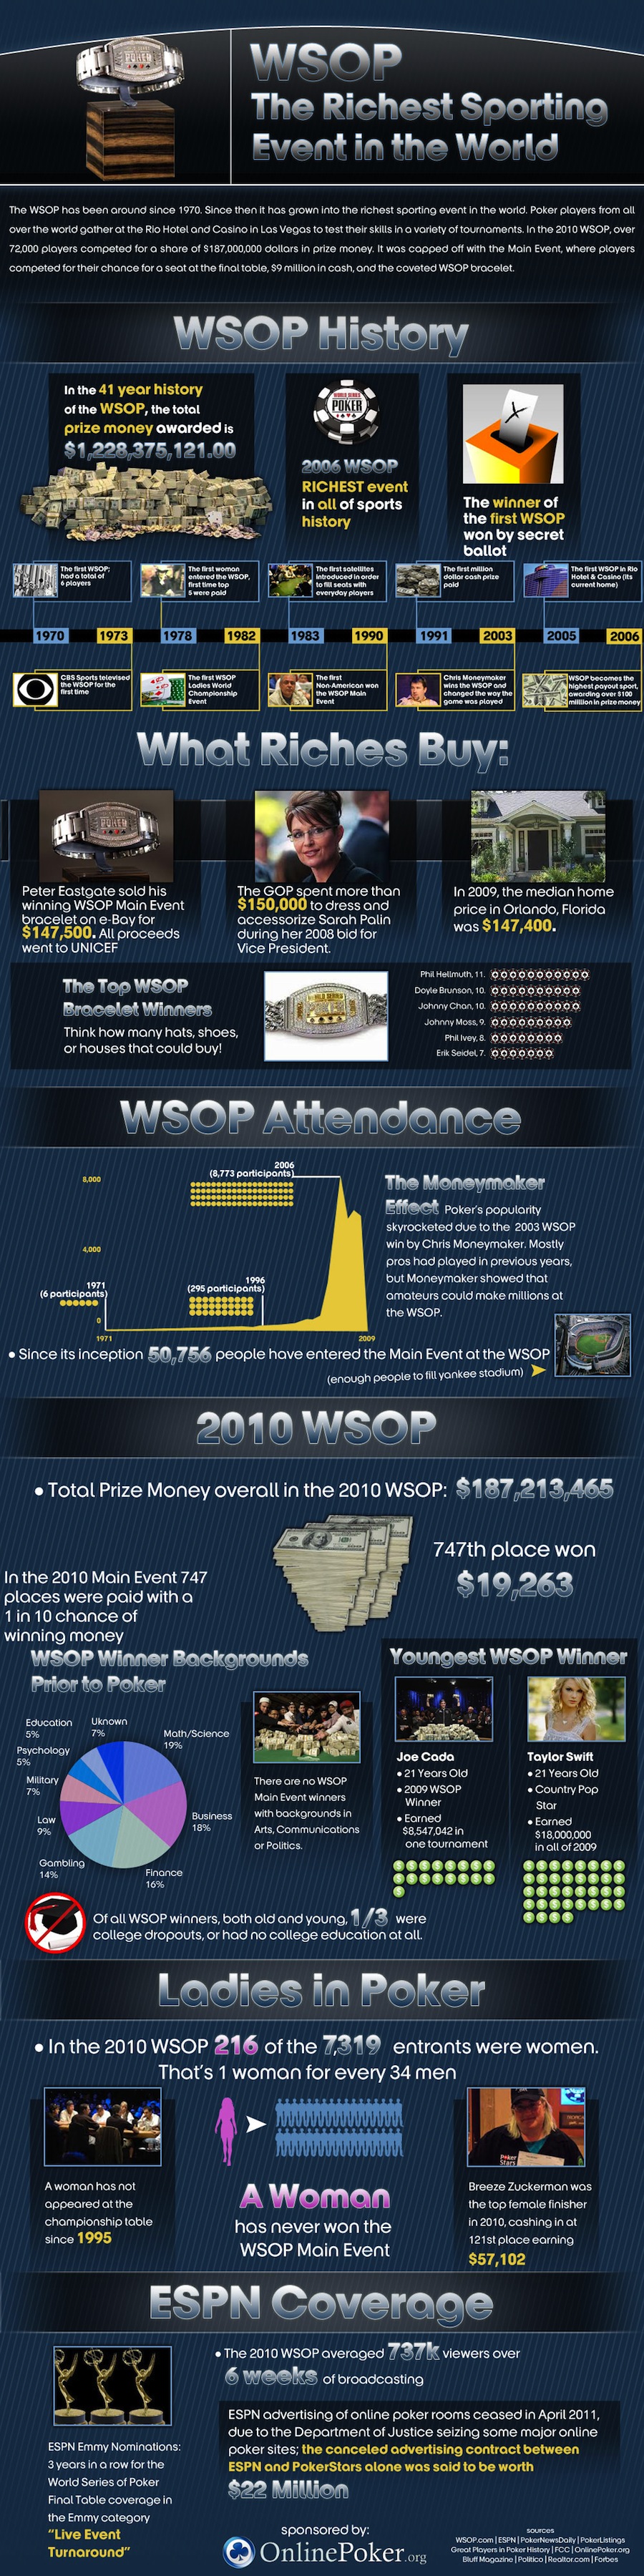 The WSOP - Richest Sporting Event in the World [Infographic]